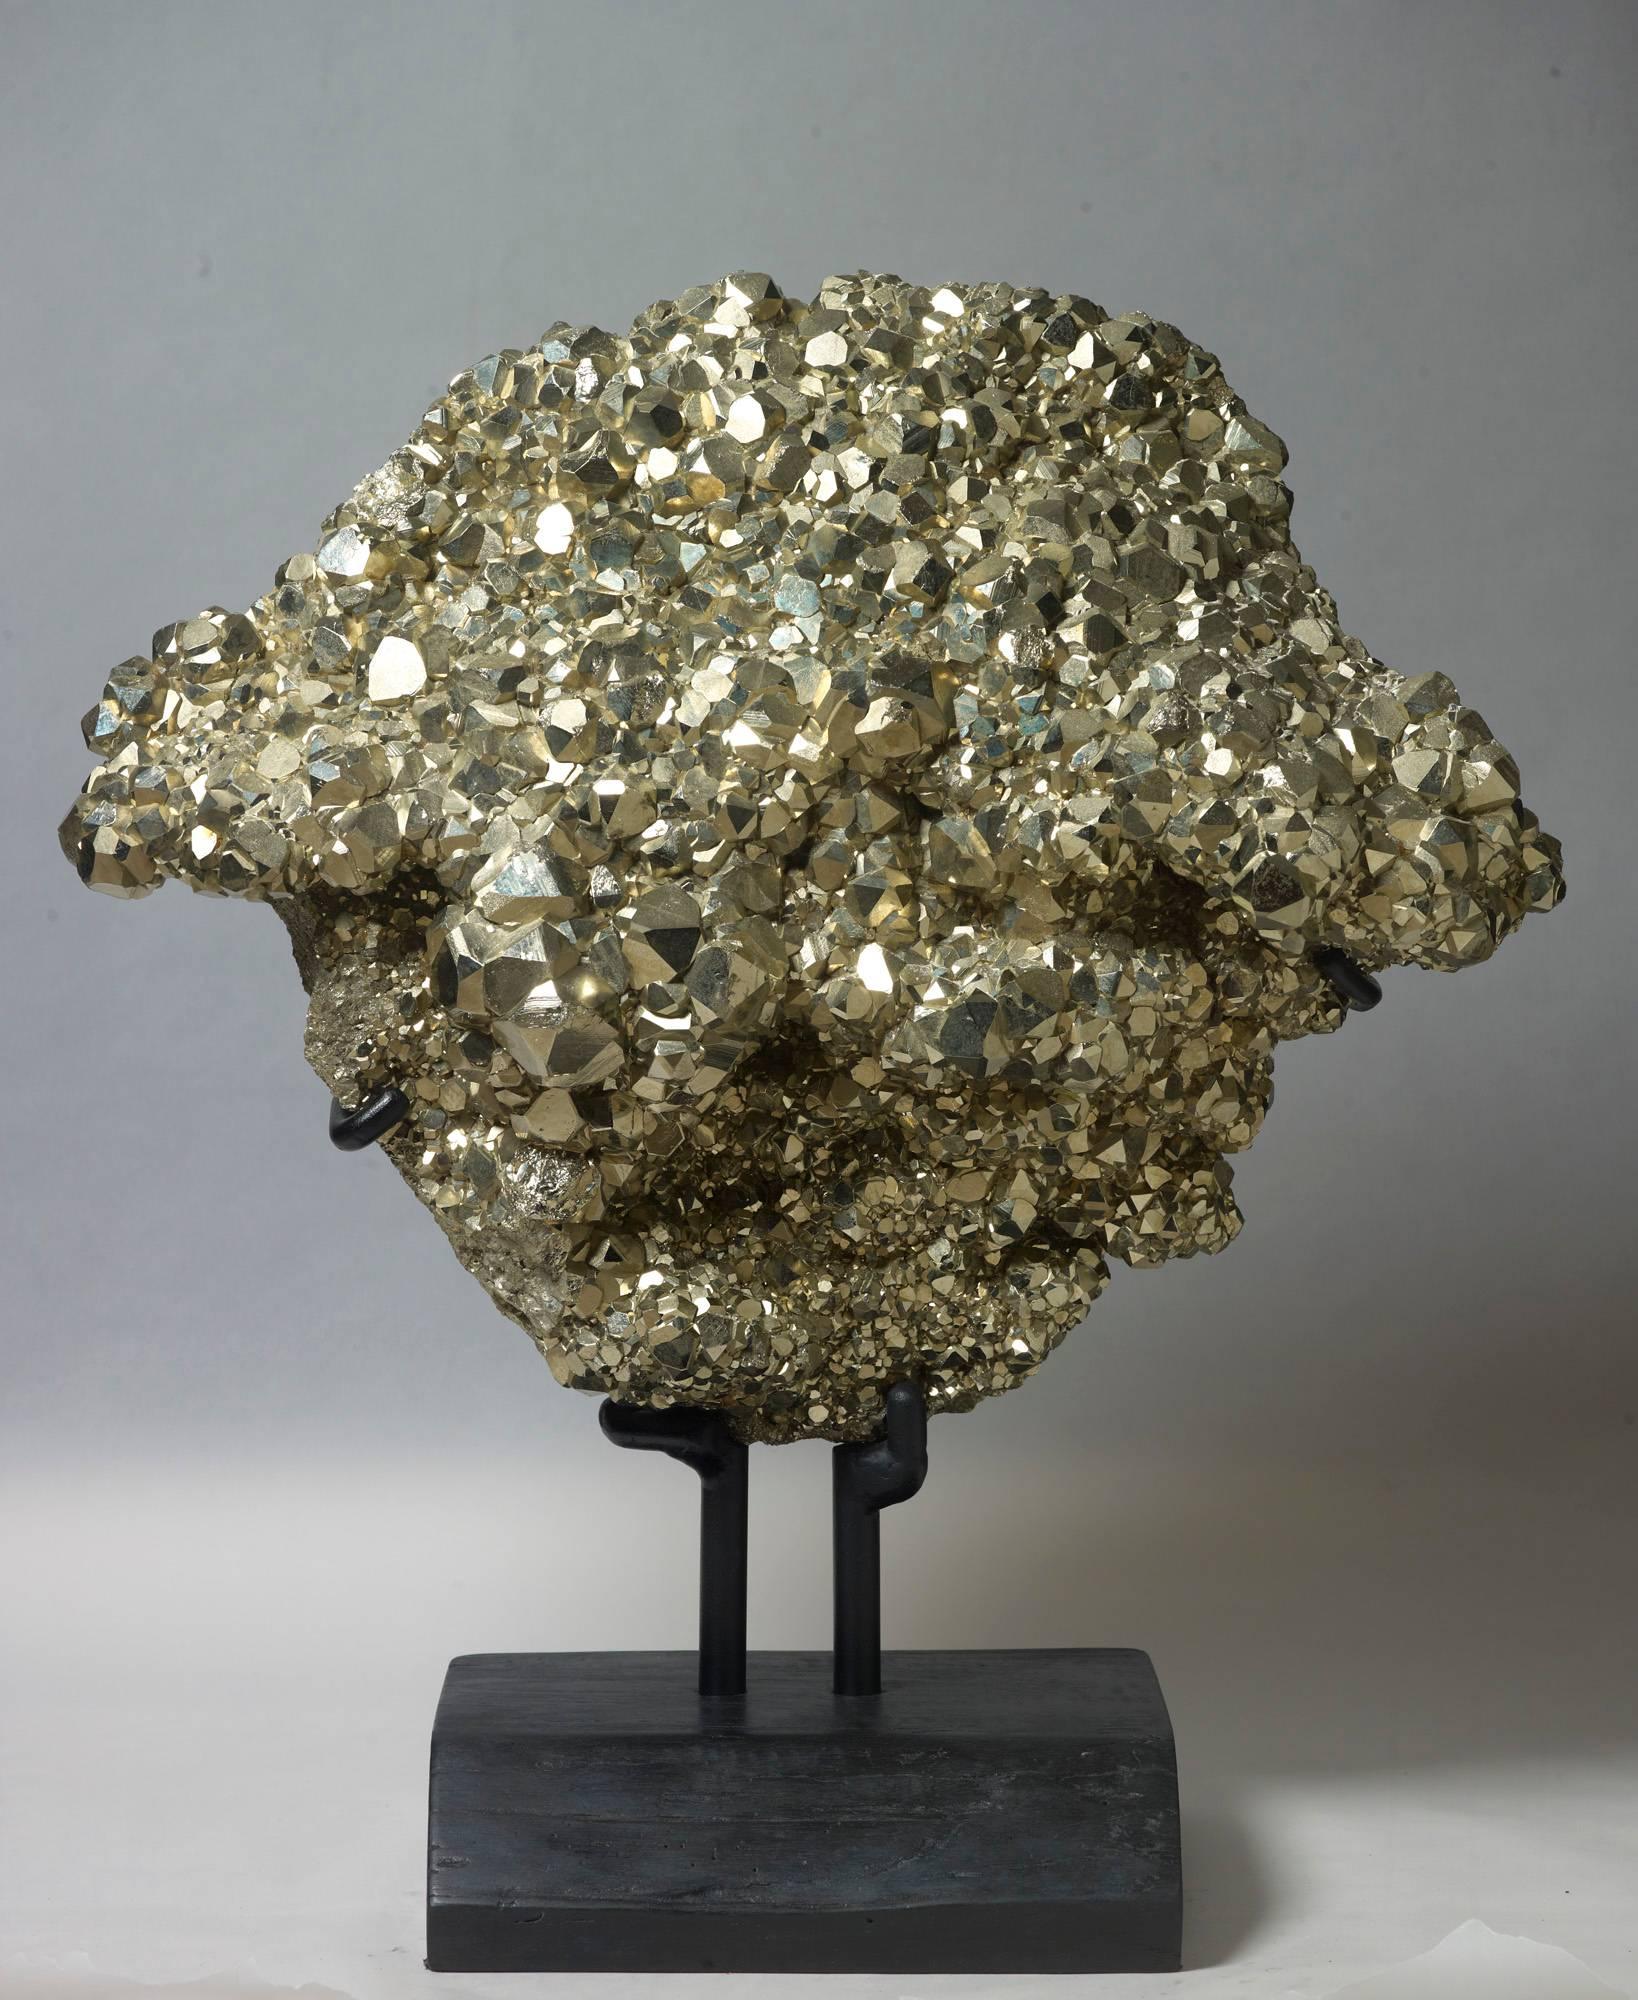 Unusually large and impressive plate of dodecahedral pyrite from Peru. Measures: 67 x 59 x 29 with stand.